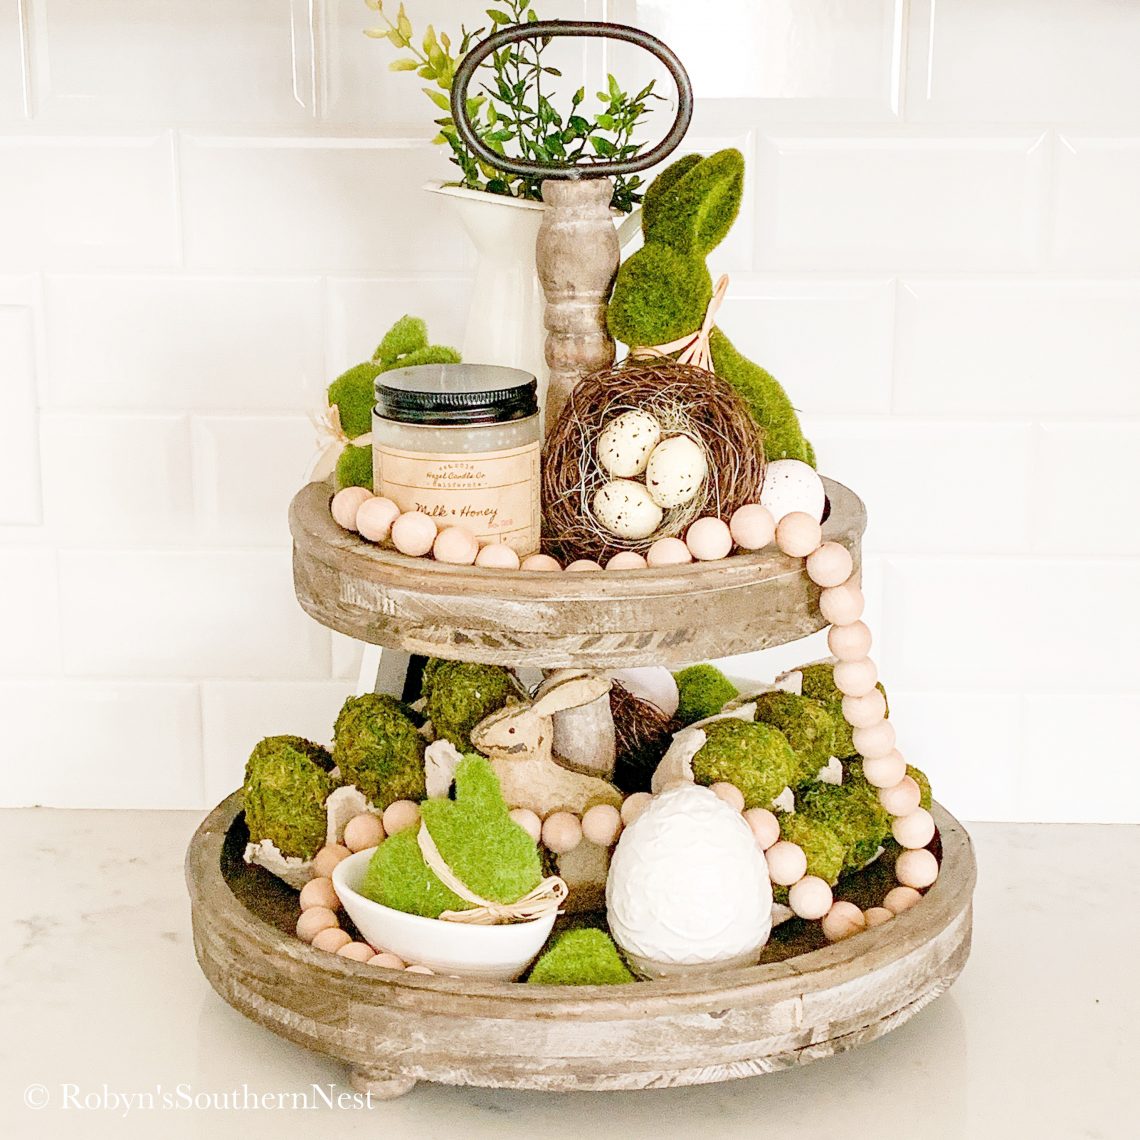 Where to Find Tiered Trays - Robyn's Southern Nest